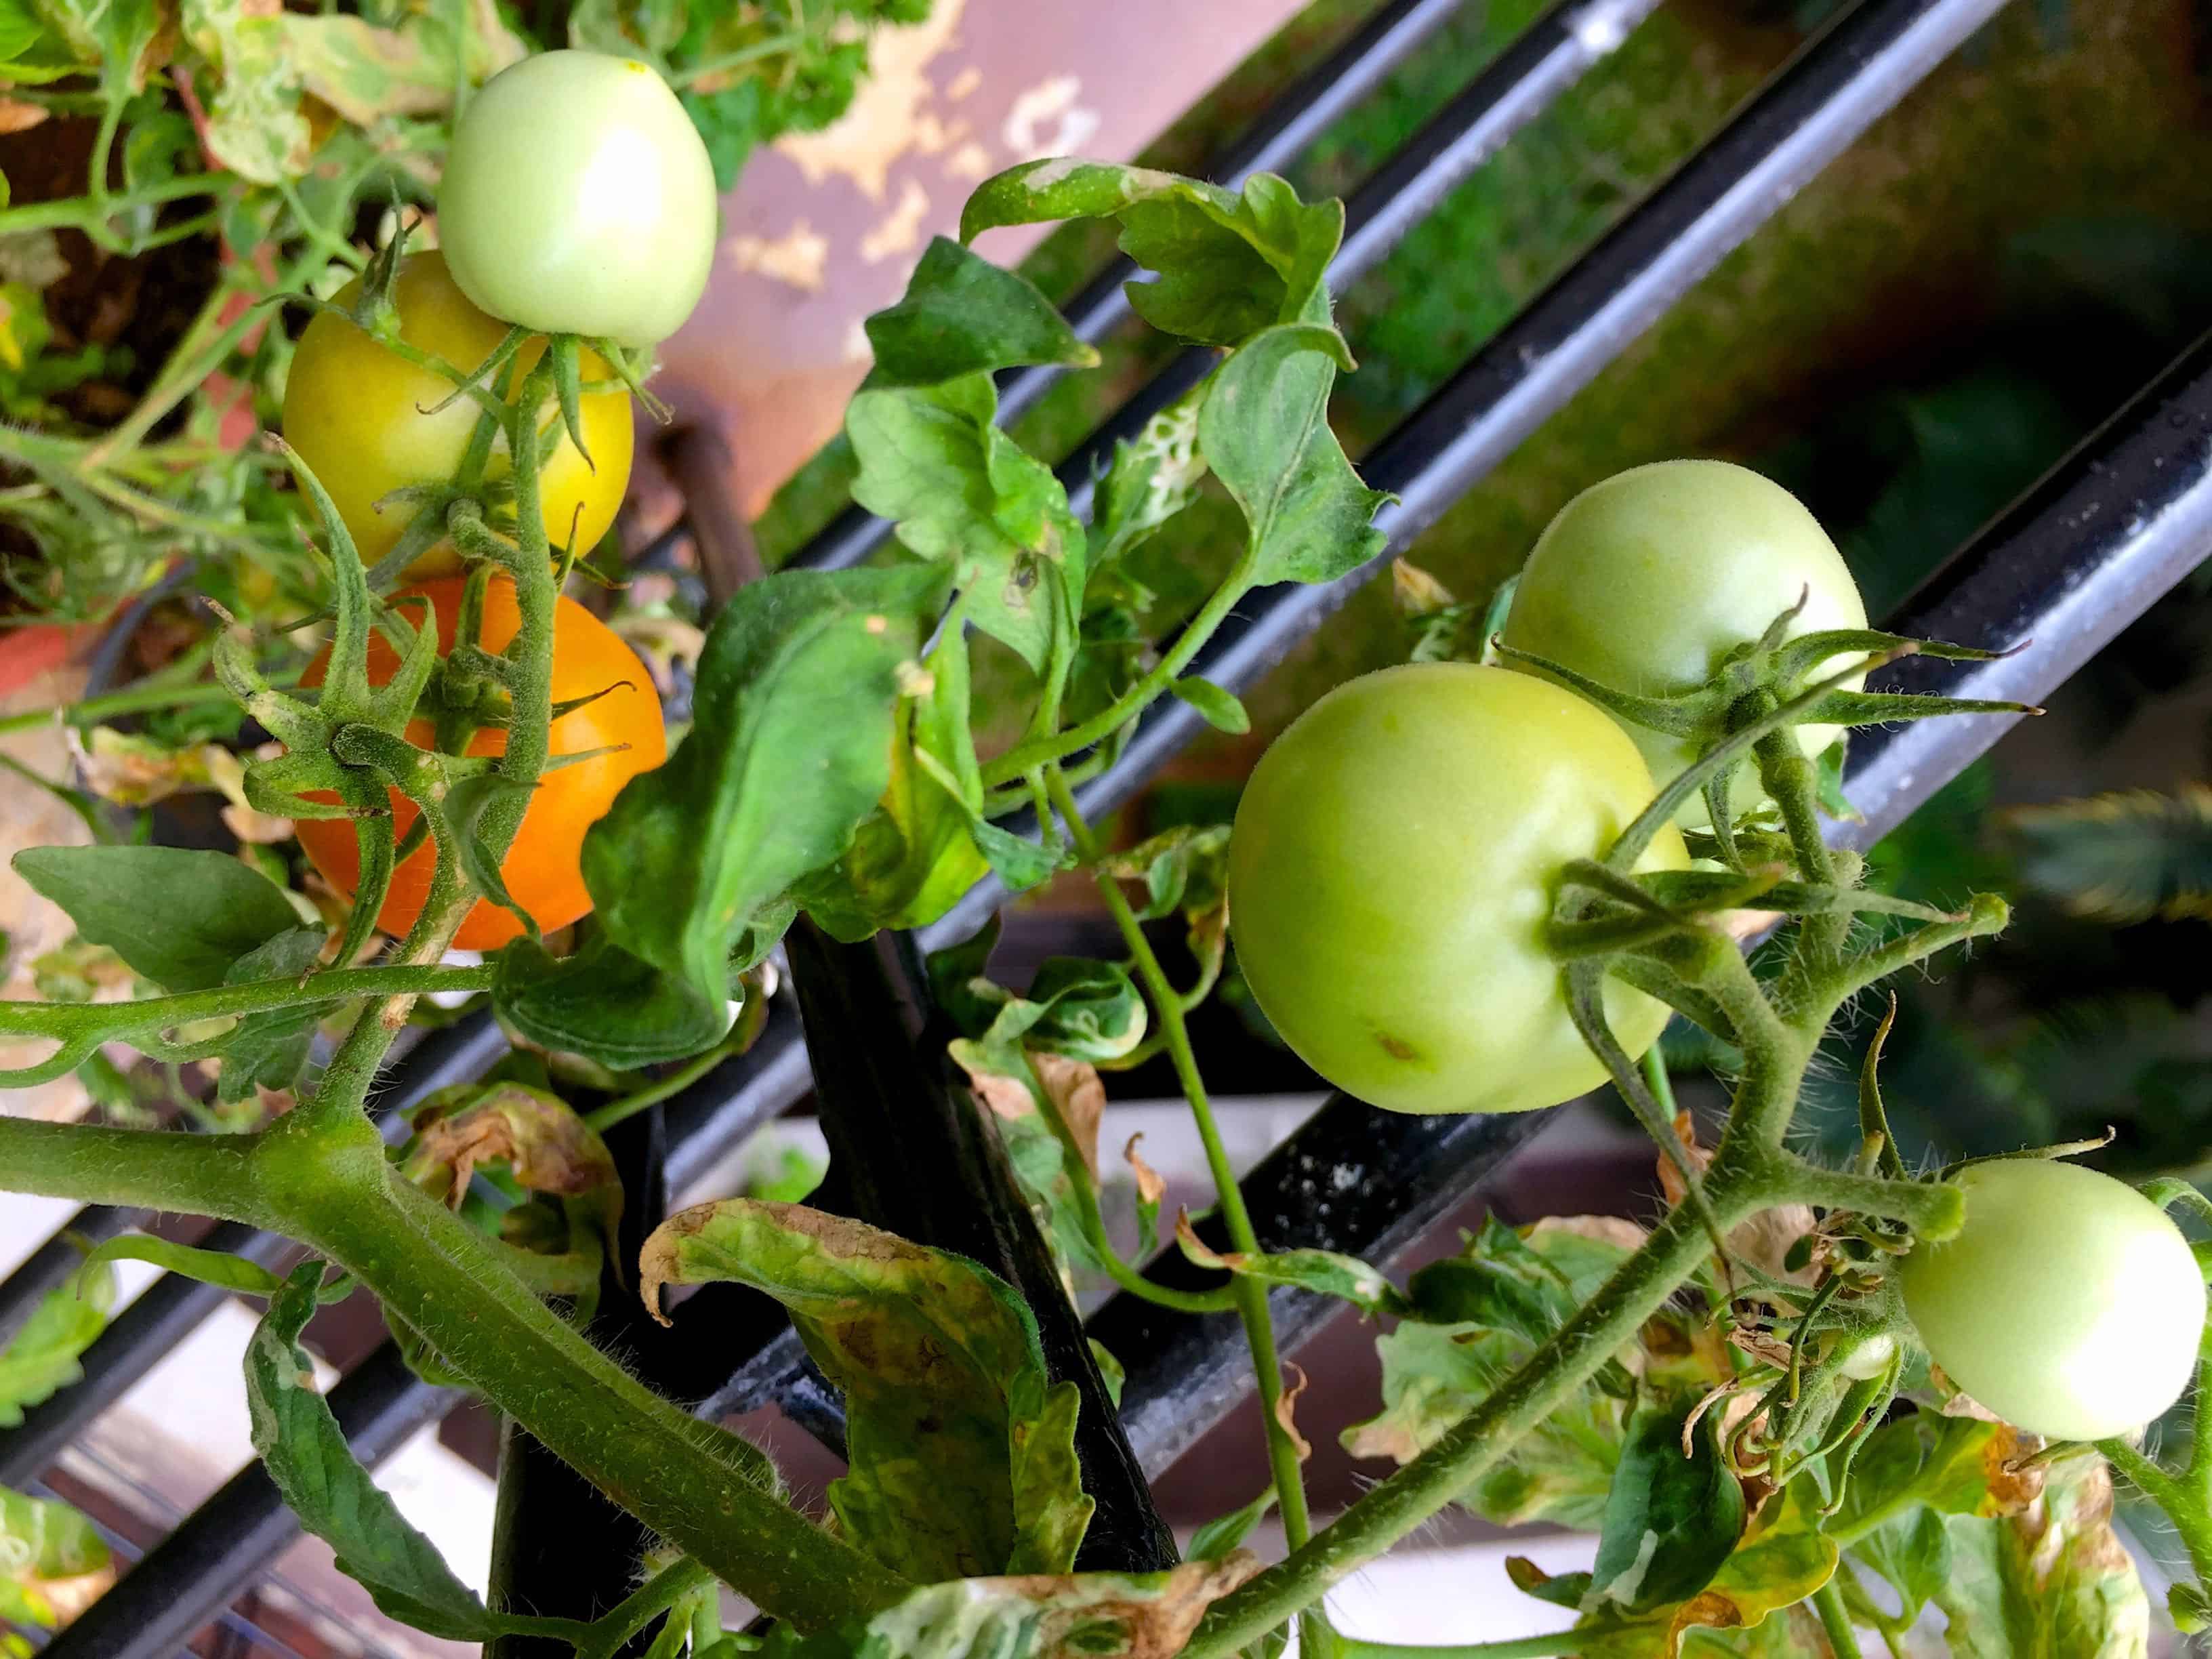 Green tomatoes from my little balcony garden